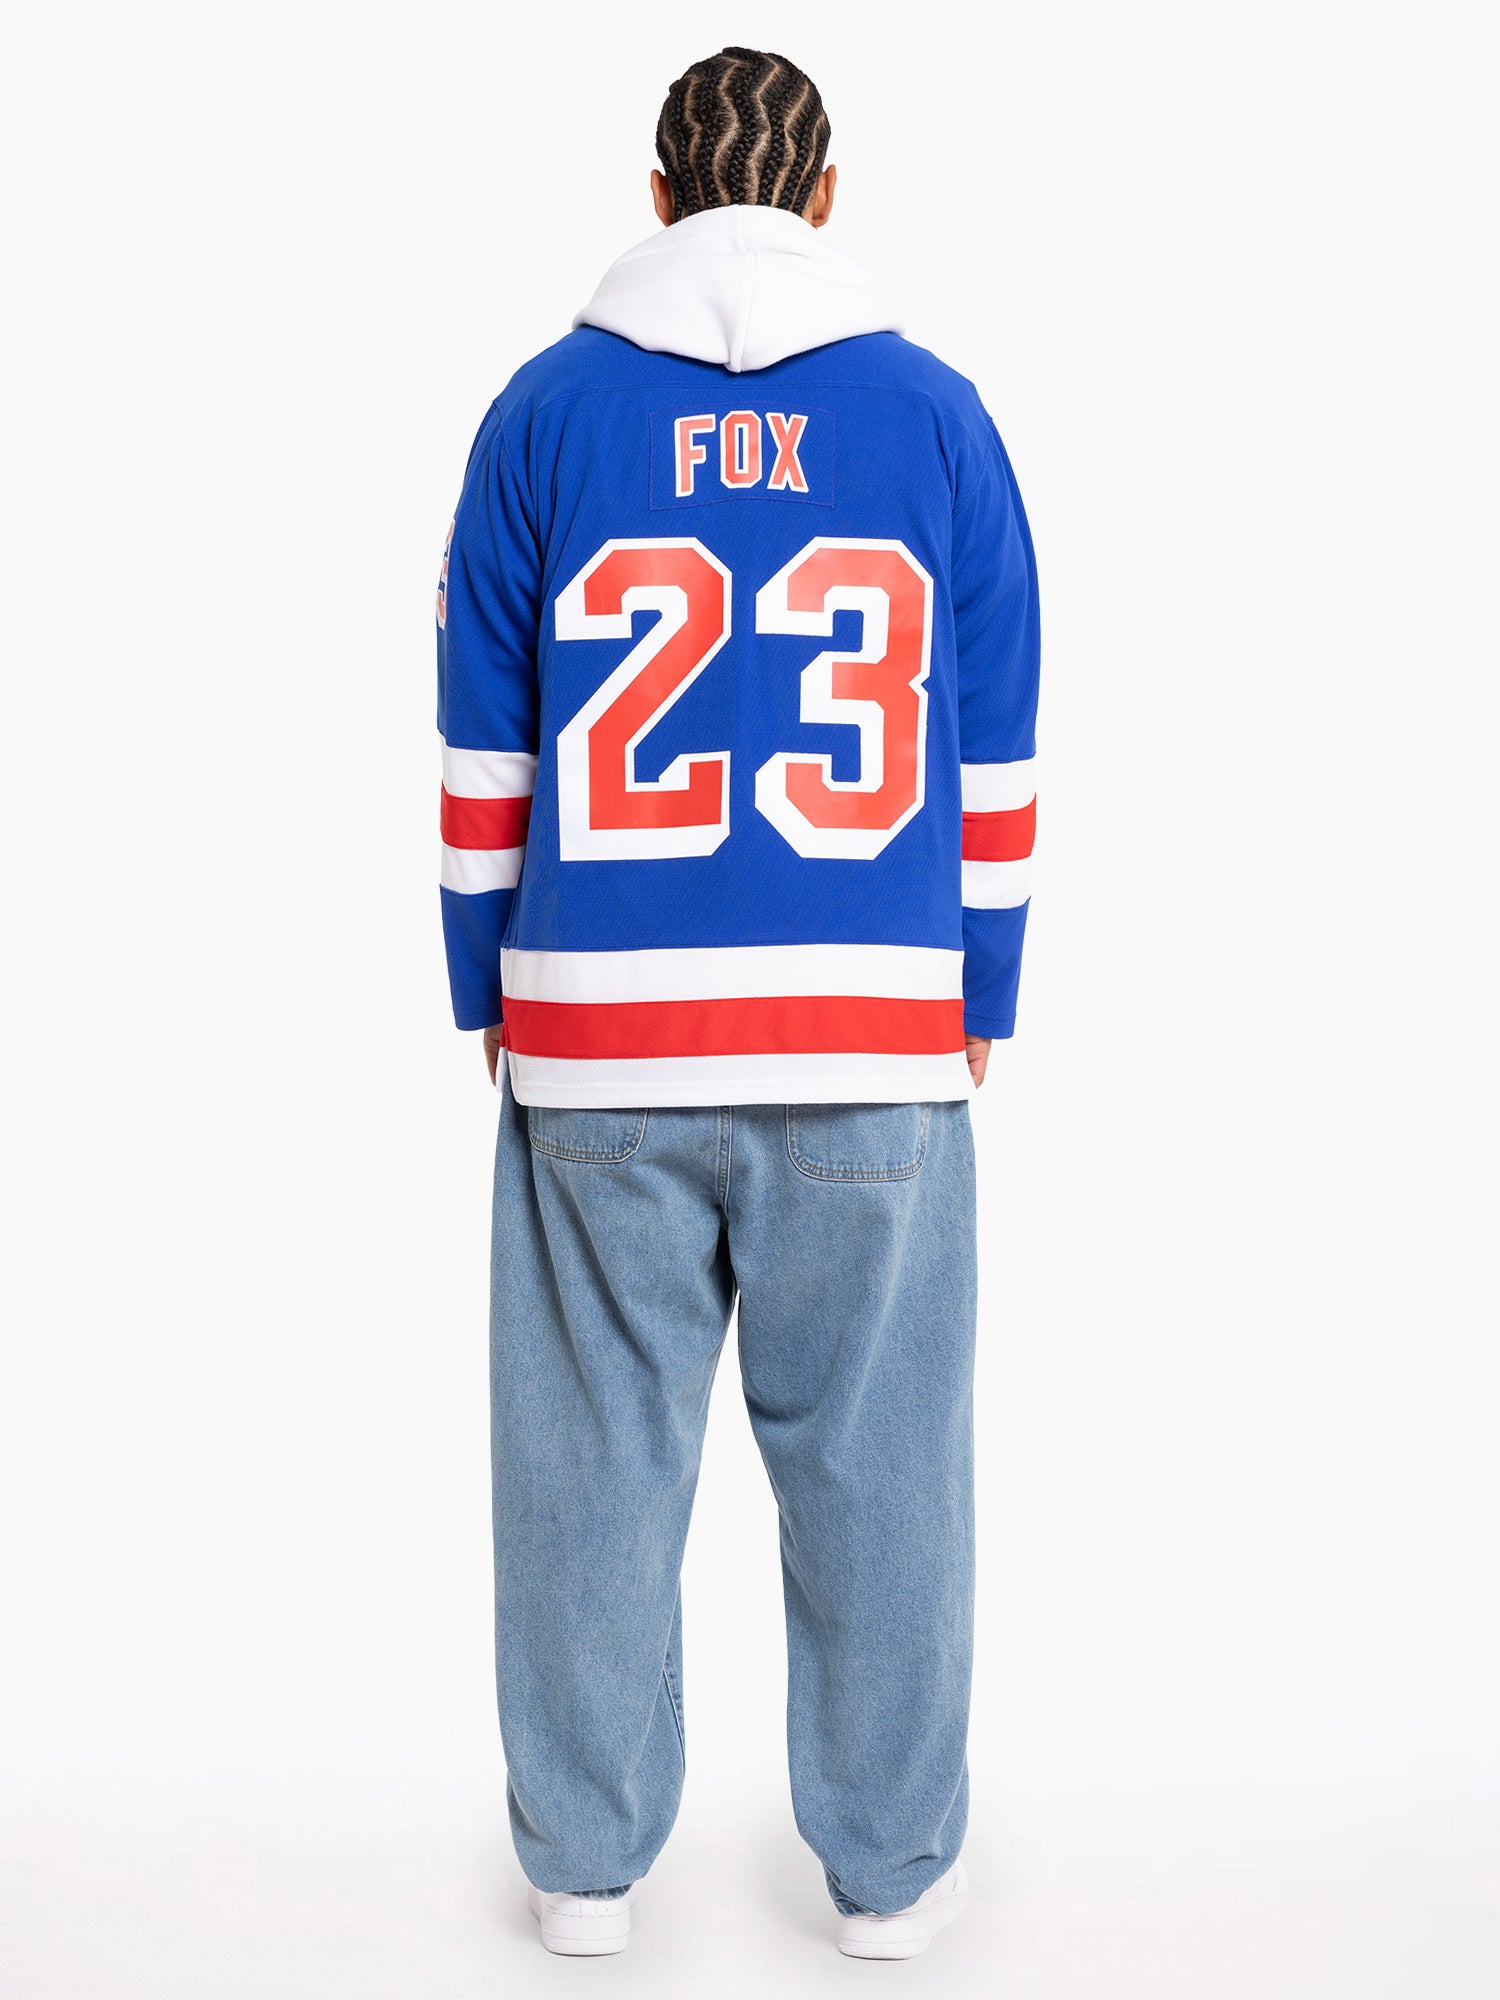 Buy New York Rangers 2021 Jersey - Adam Fox Men's Shirts from Mitchell &  Ness. Find Mitchell & Ness fashion & more at